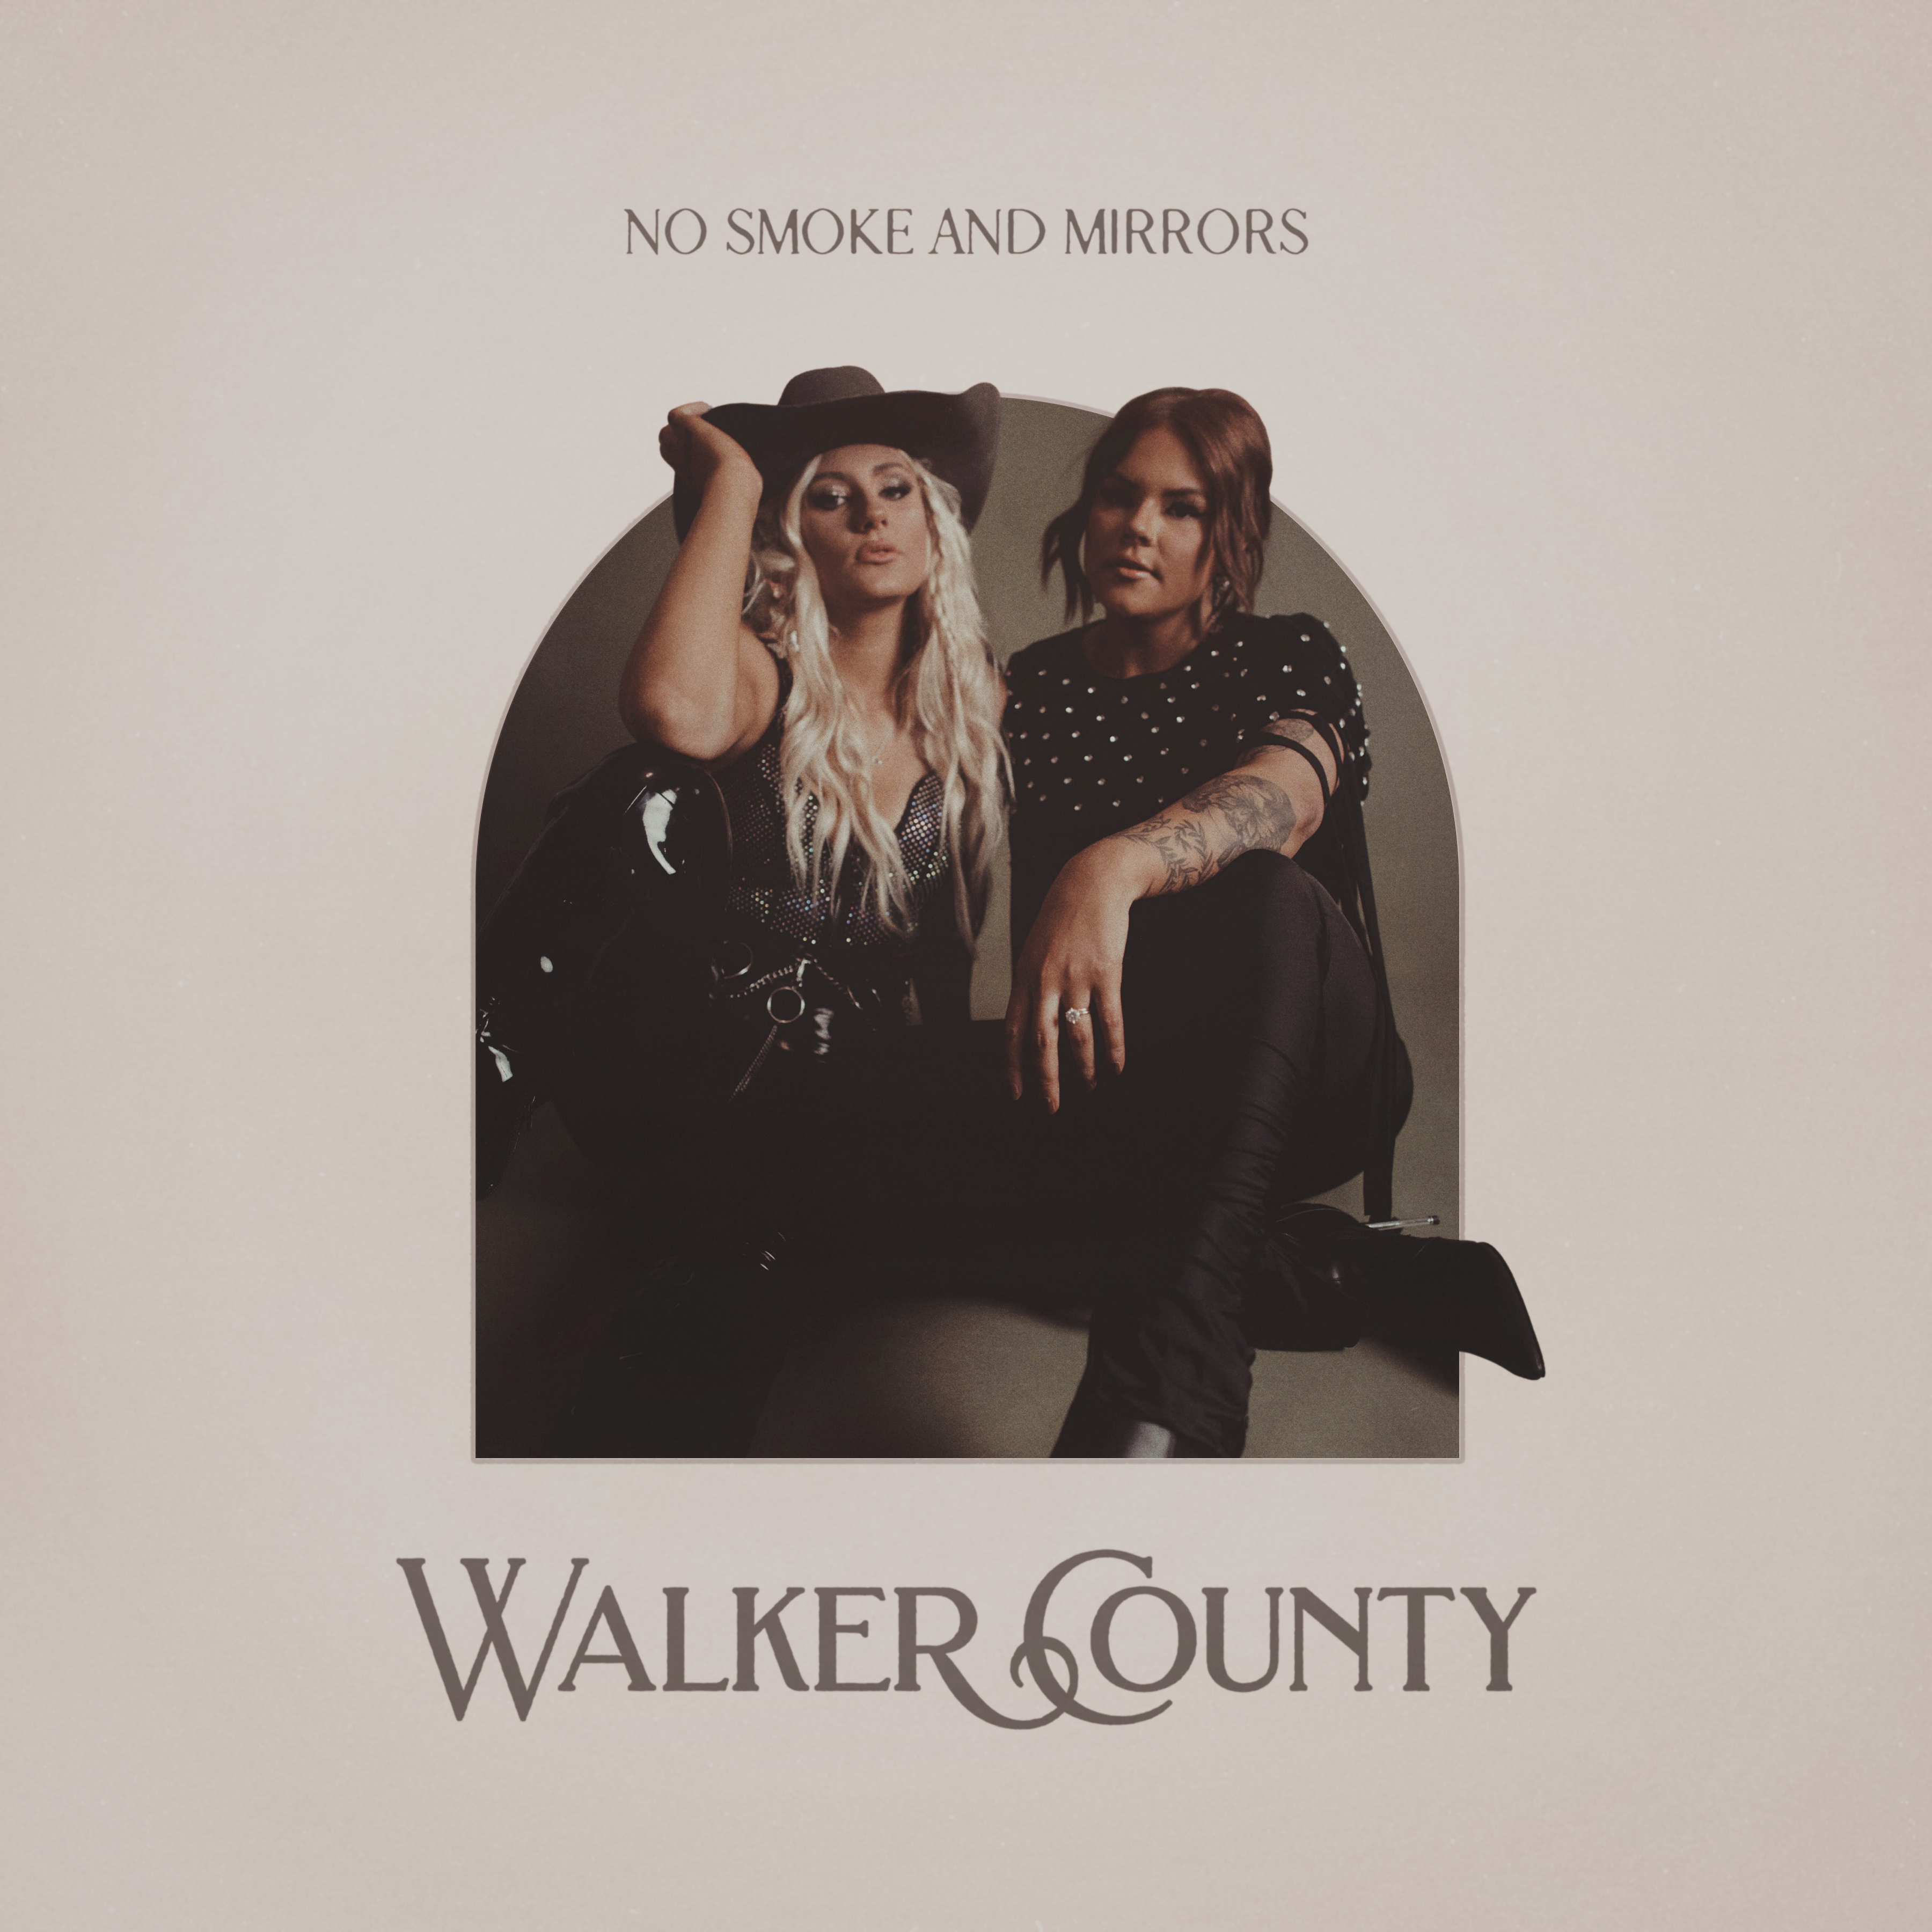 WALKER COUNTY RELEASES DEBUT EP NO SMOKE AND MIRRORS